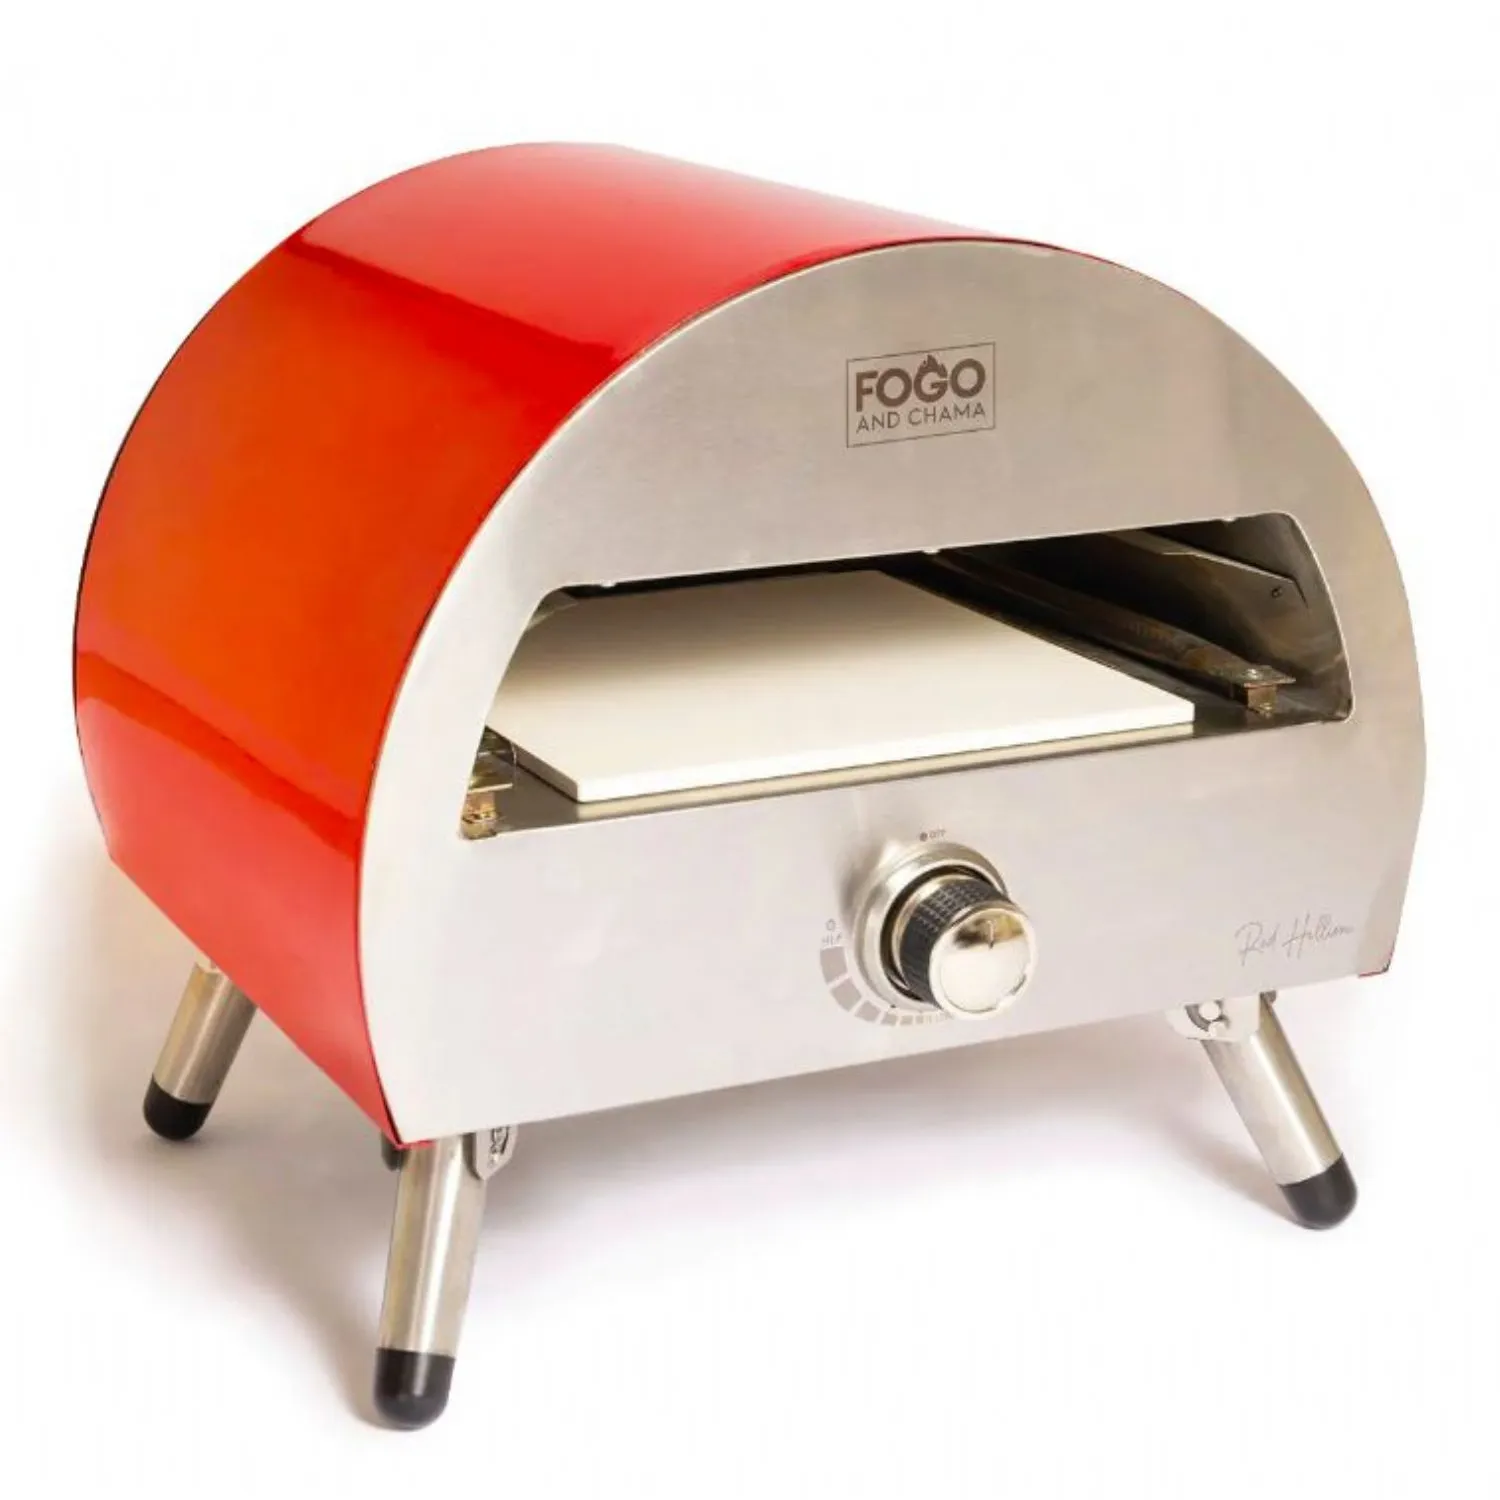 Red Hellion Pizza Oven | with Free Rain Cover